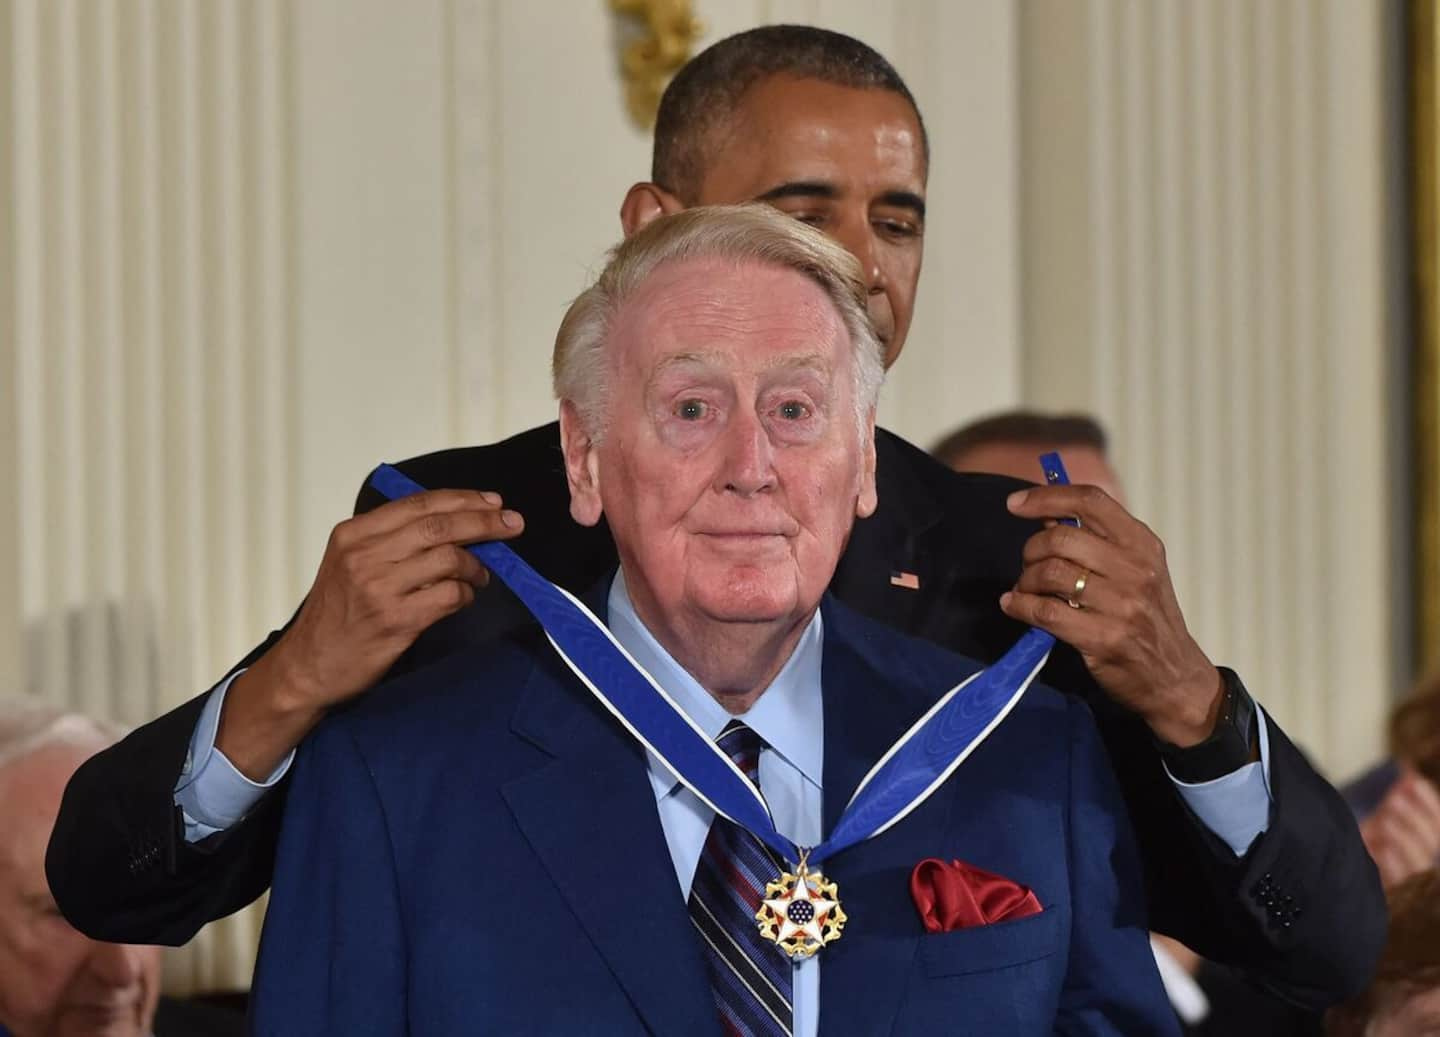 Former baseball commentator Vin Scully is no more